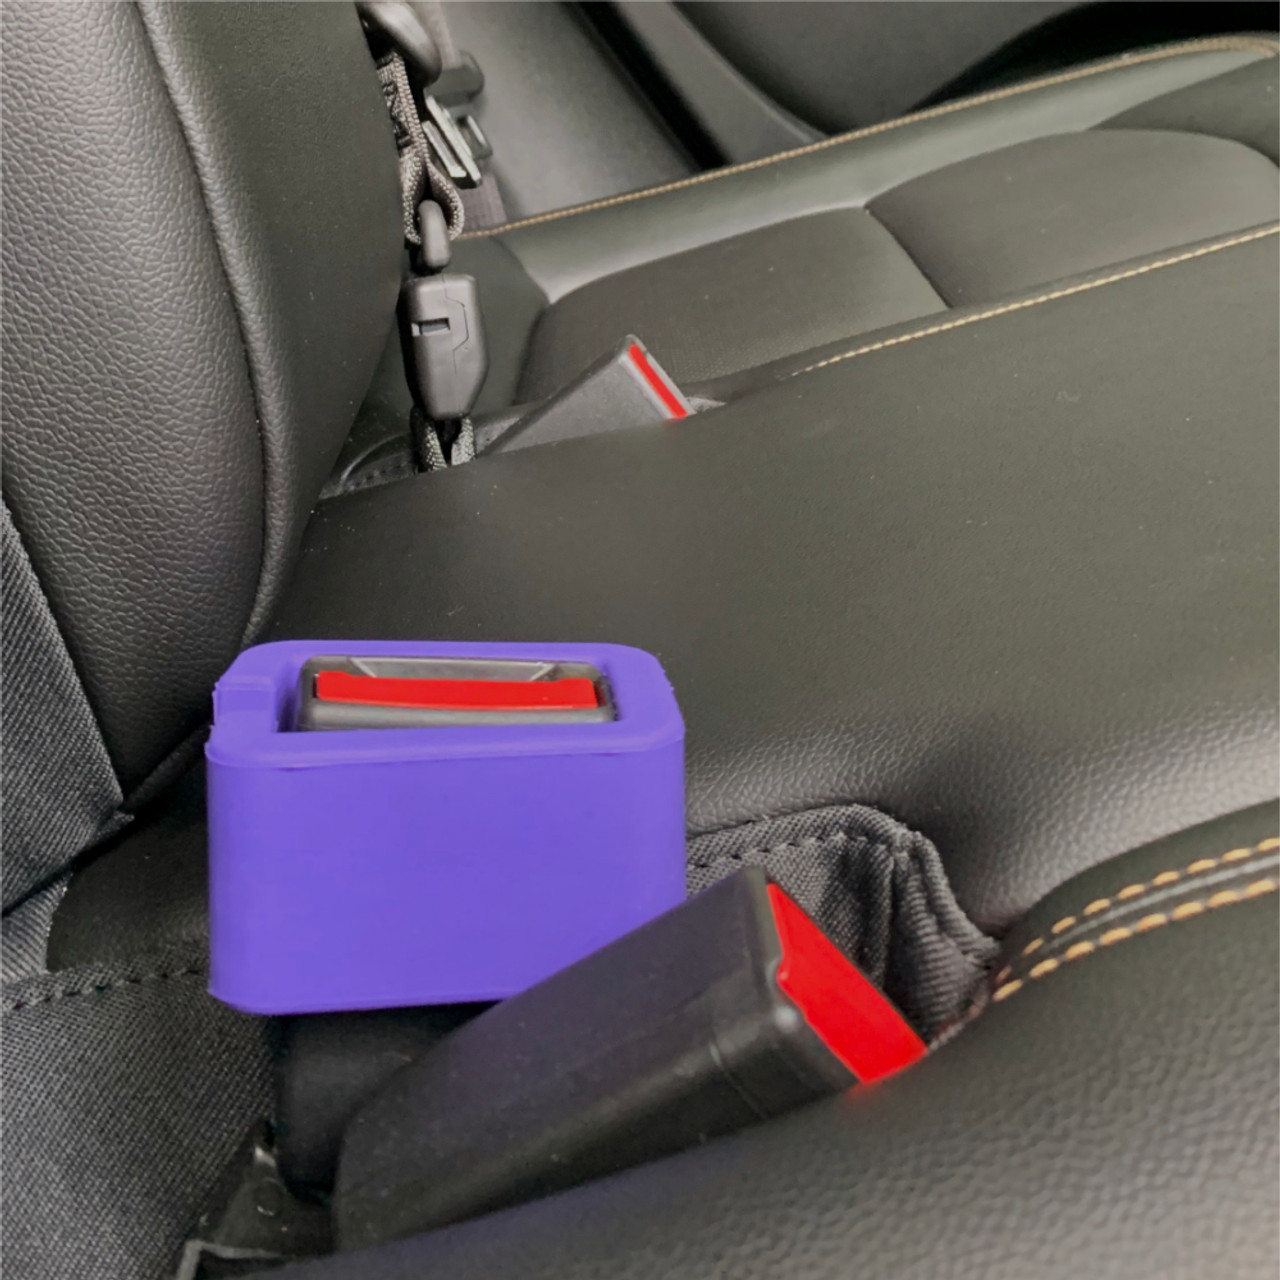 Seat Belt Buckle Booster (BPA Free) - Raises Your Seat Belt for Easy Access  - Stop Fishing for Buried Seat Belts - Makes Receptacle Stand Upright